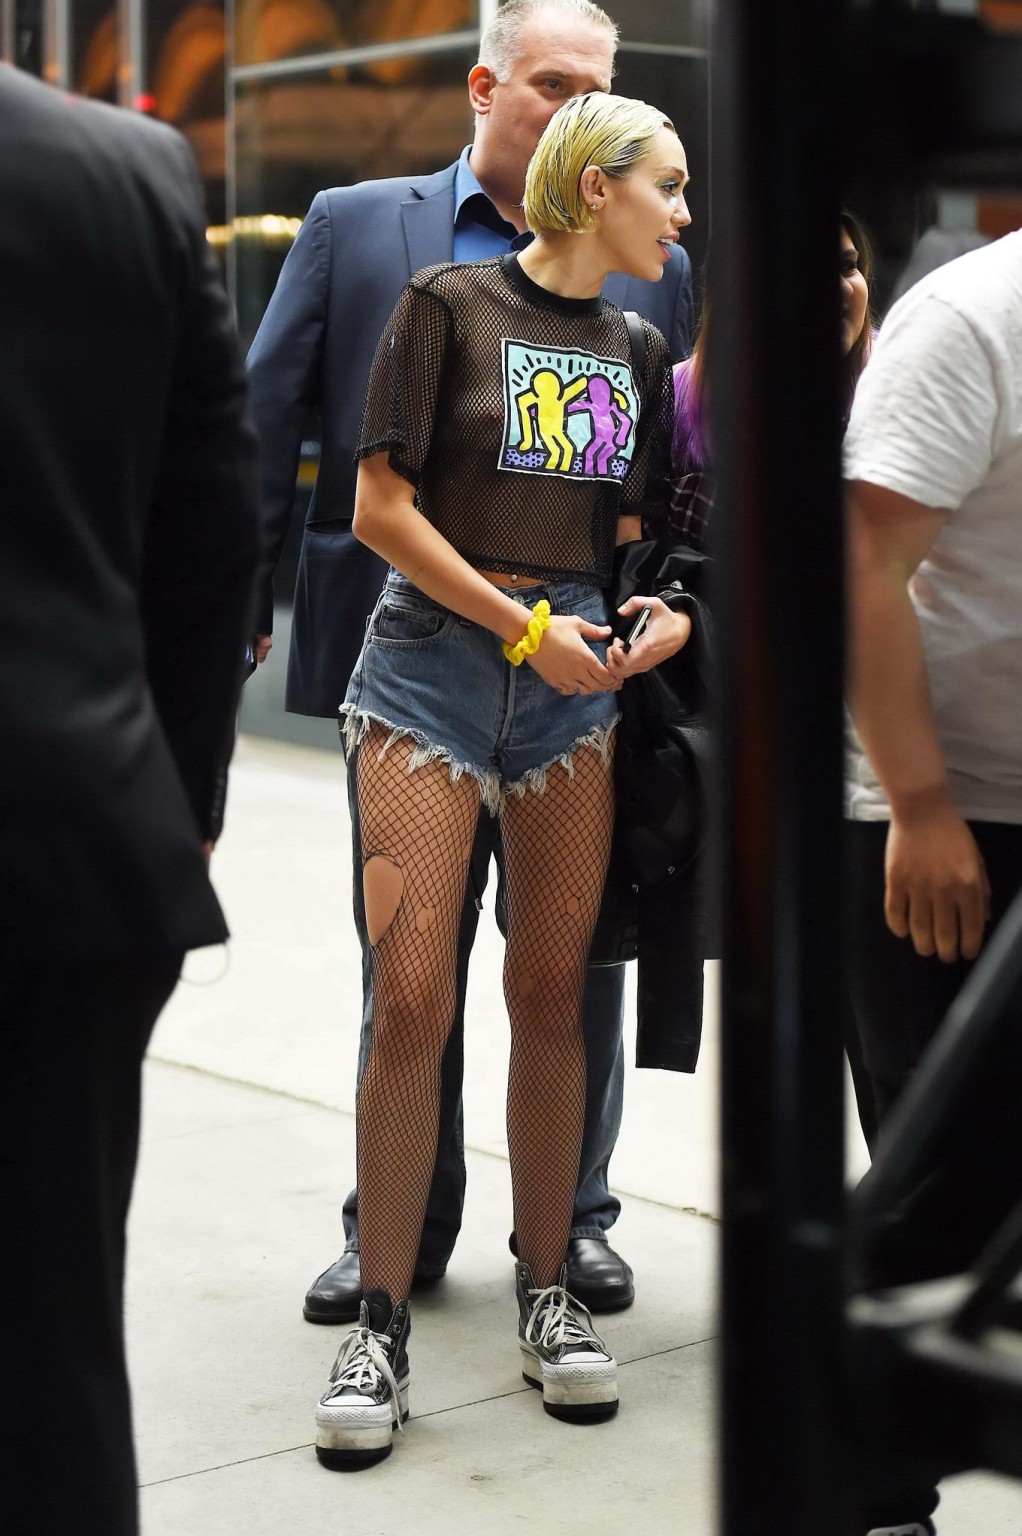 Miley Cyrus shows off her boobs wearing a mesh Tshirt out in NYC #75164277